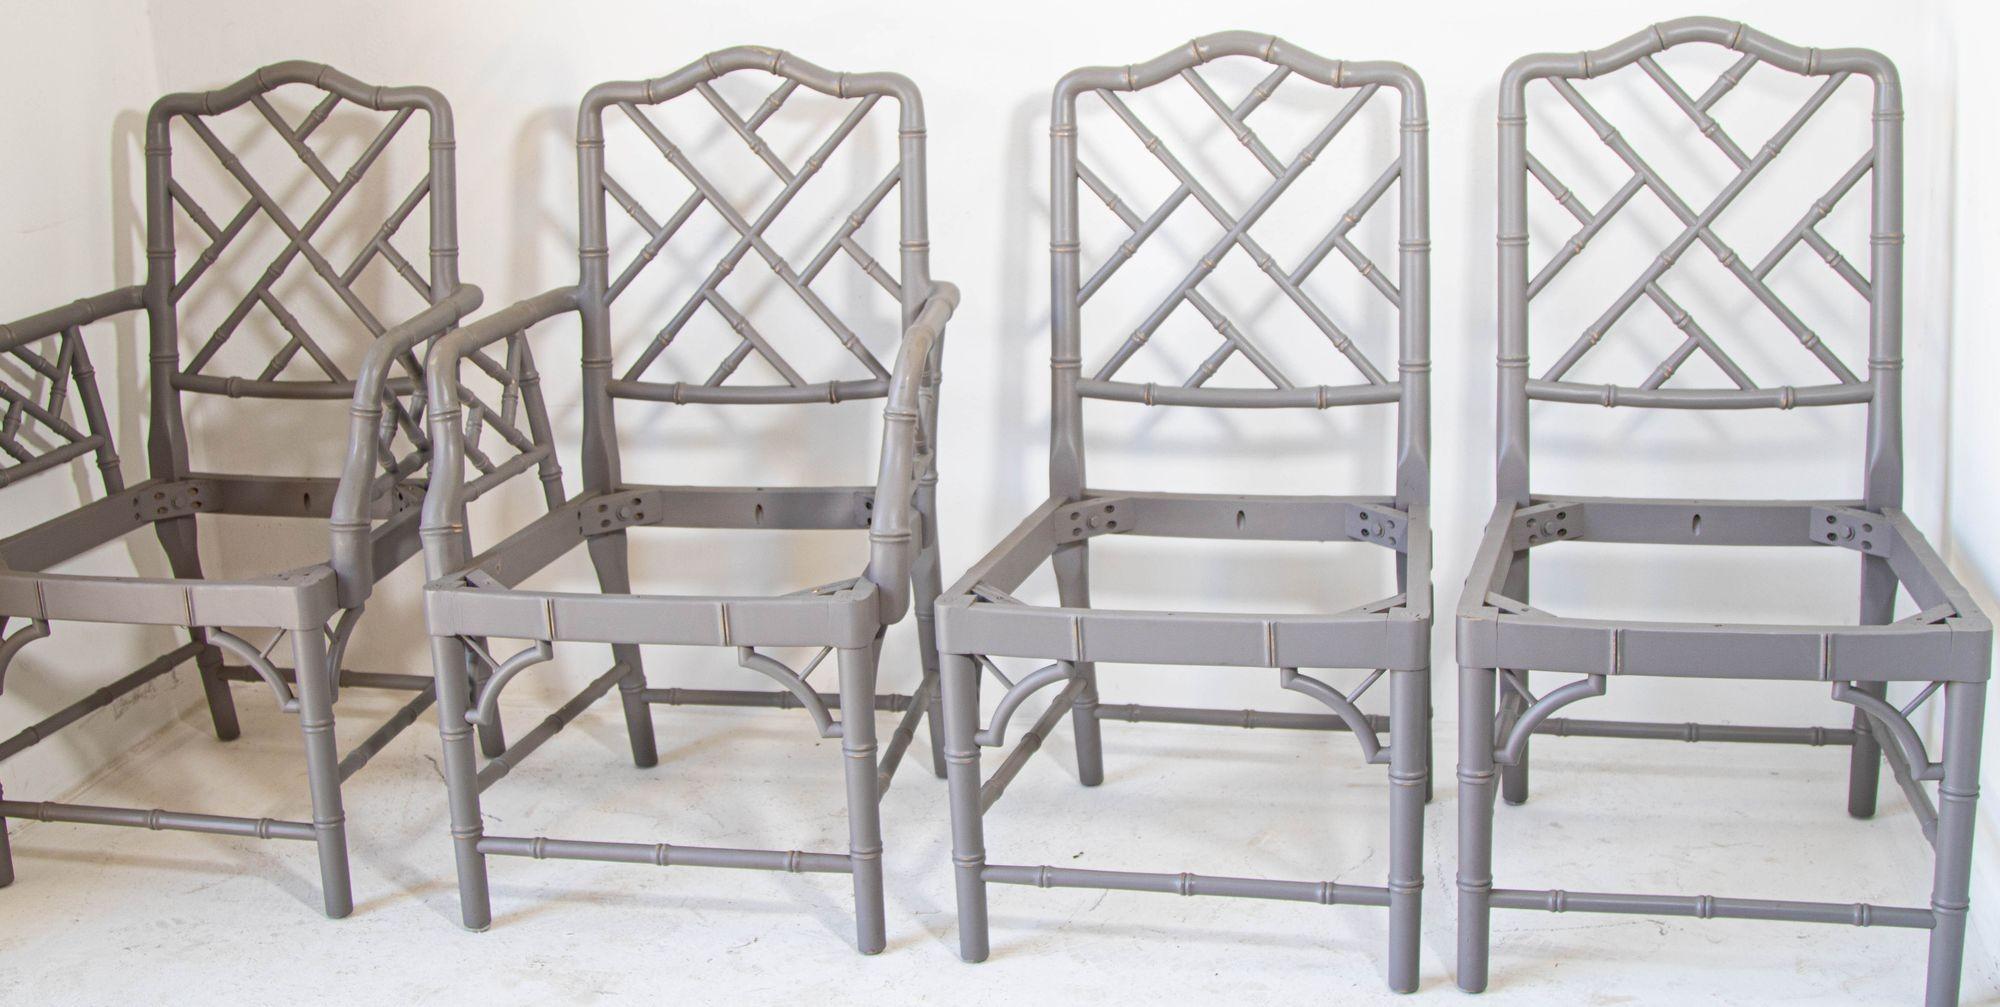 Set of Four midcentury Faux Bamboo Chairs, 2 armchairs and 2 chairs. 
Hollywood Regency Faux Bamboo chinoiserie Dining Chairs, a Classic set of four Chinese Chippendale dining chairs.
Stylish set of four vintage carved wood chairs with a Classic